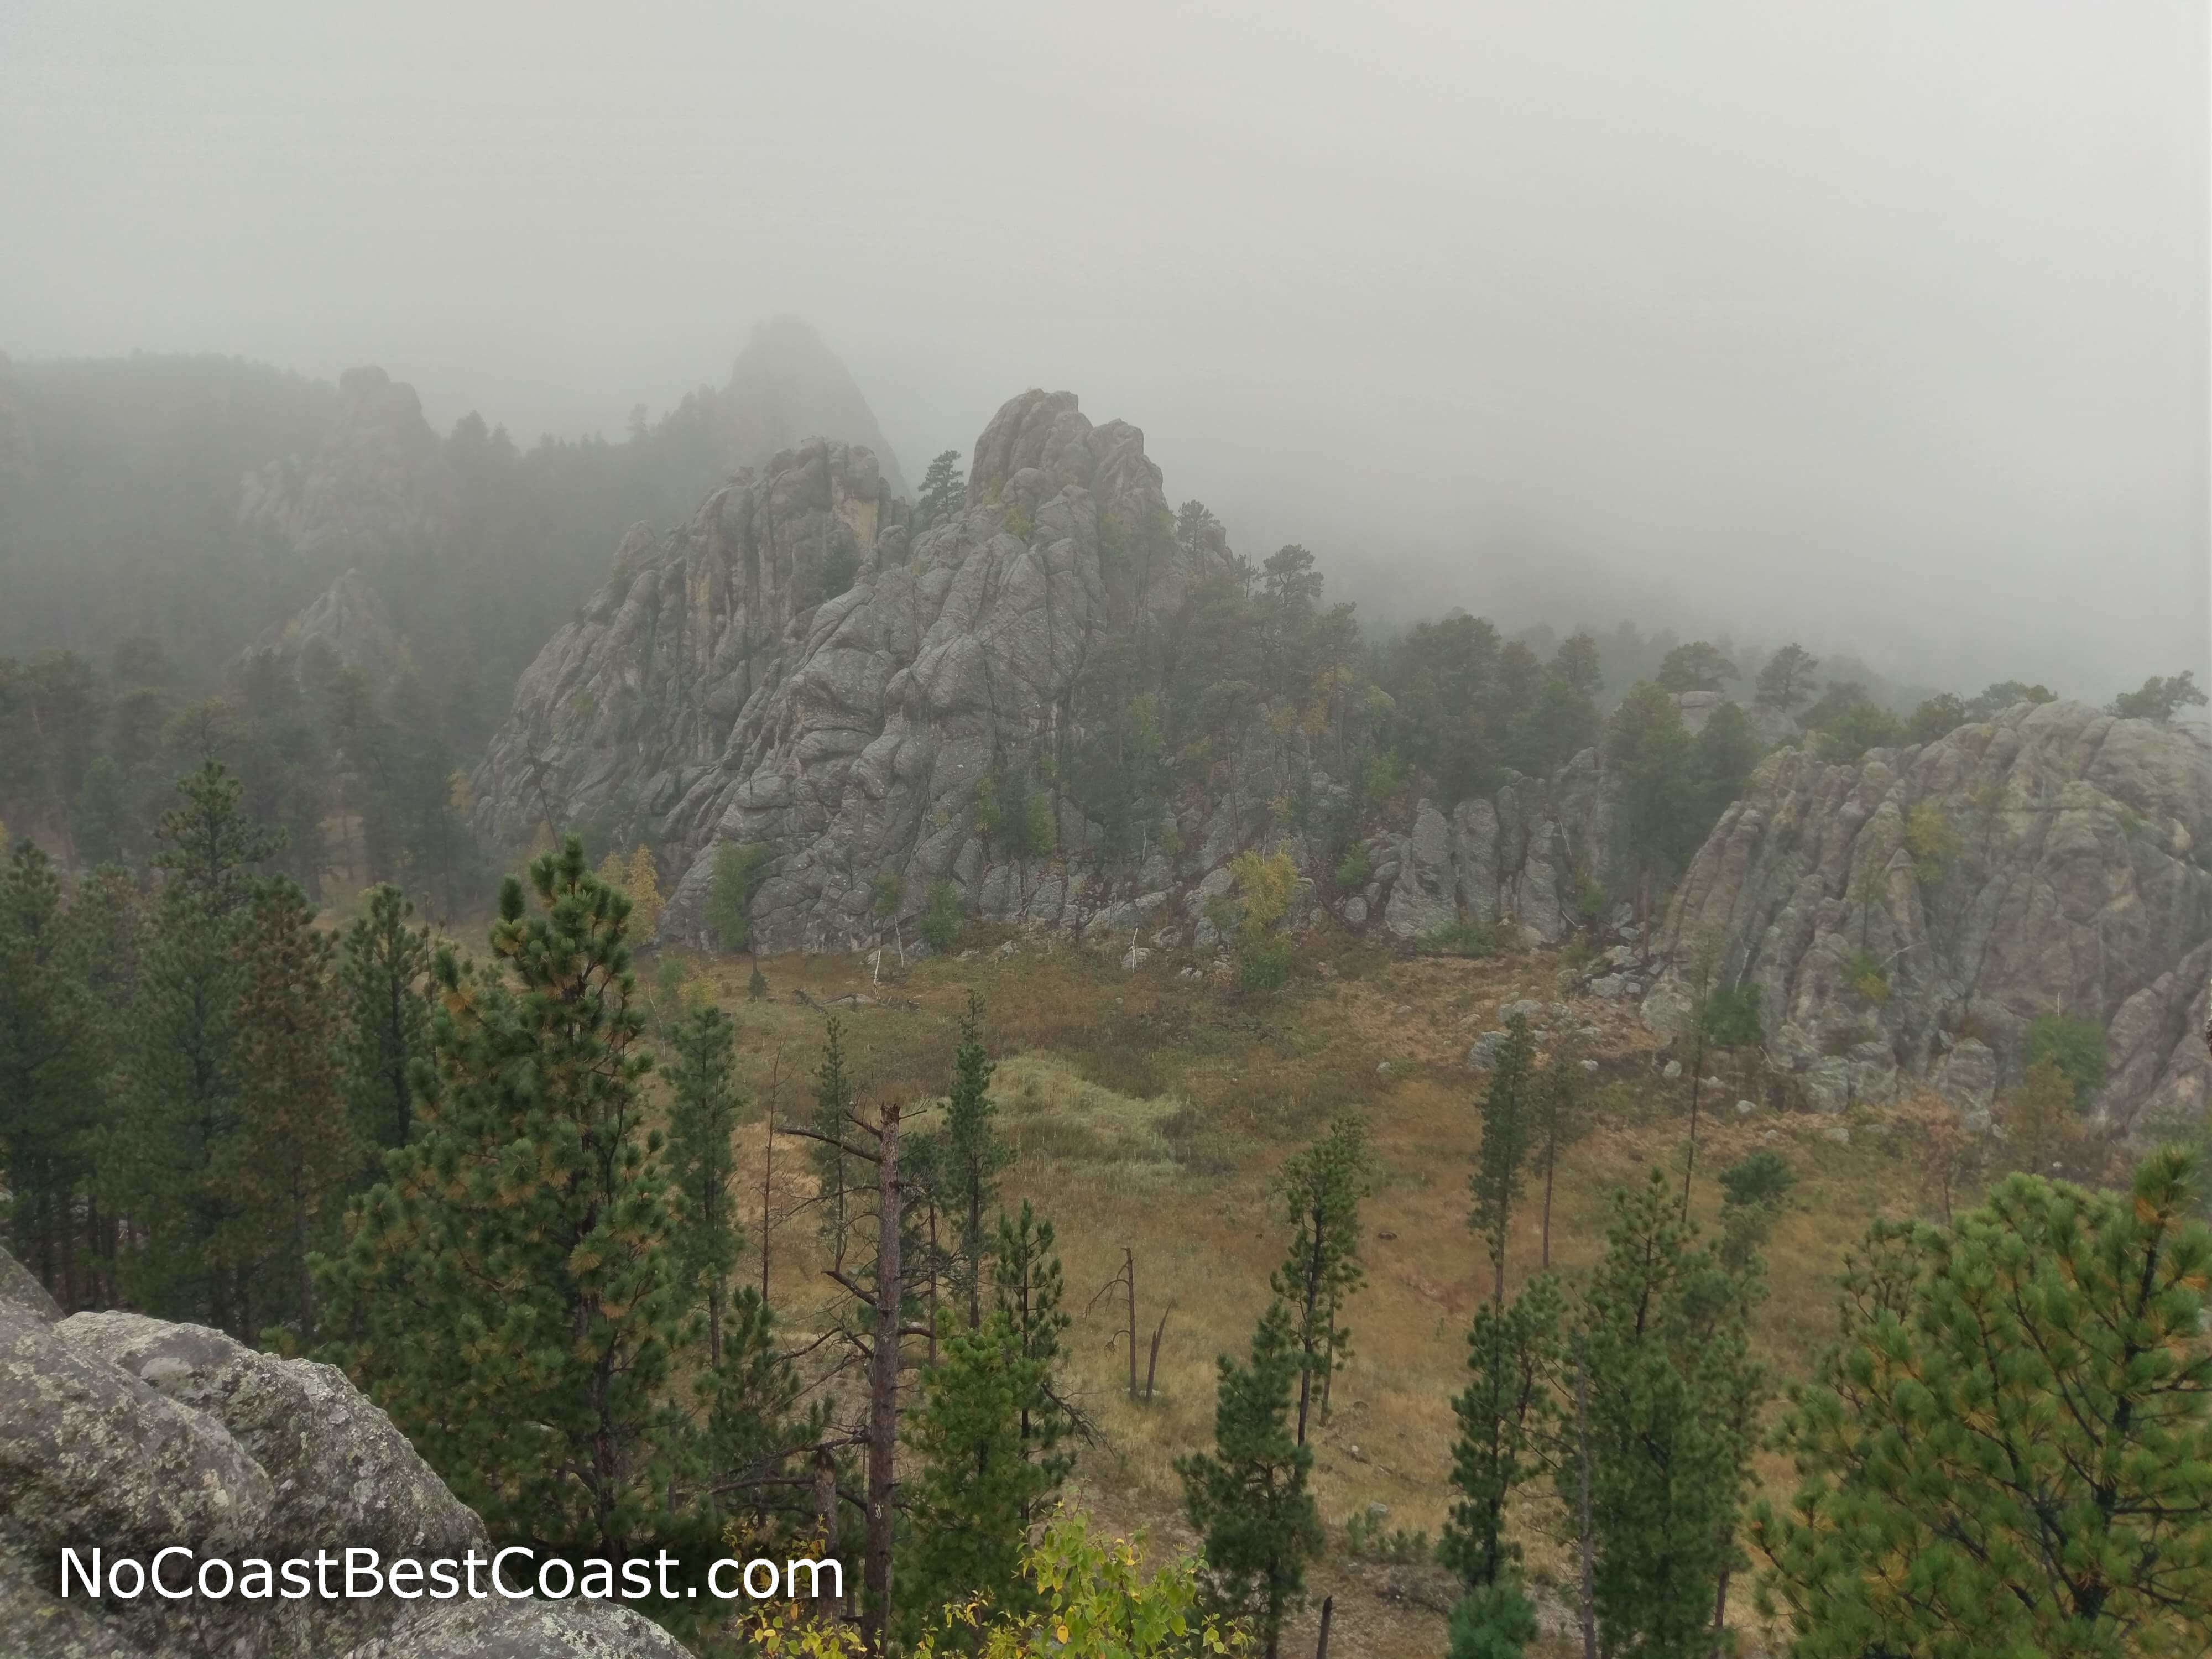 Typical Black Hills rock formations seen in the distance